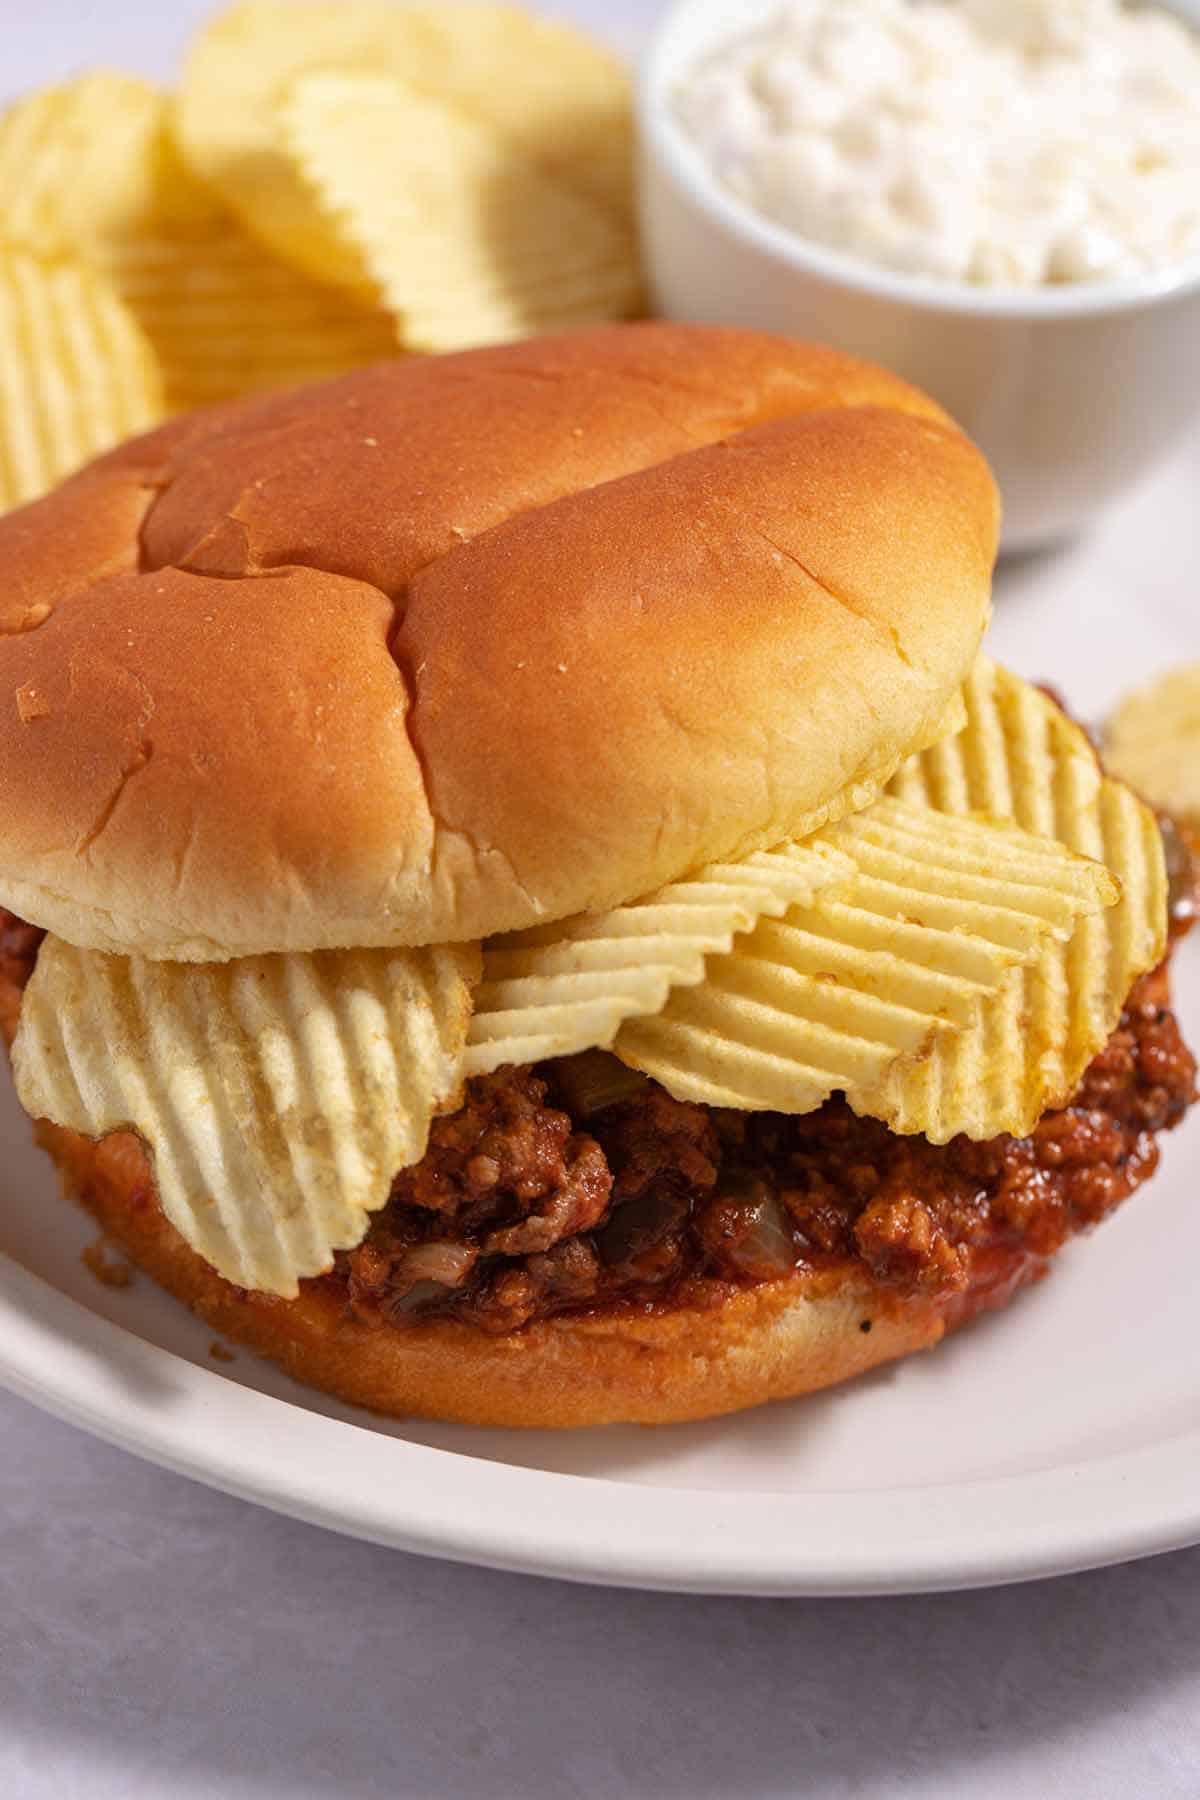 Sloppy joes on a bun with potato chips as a topping.